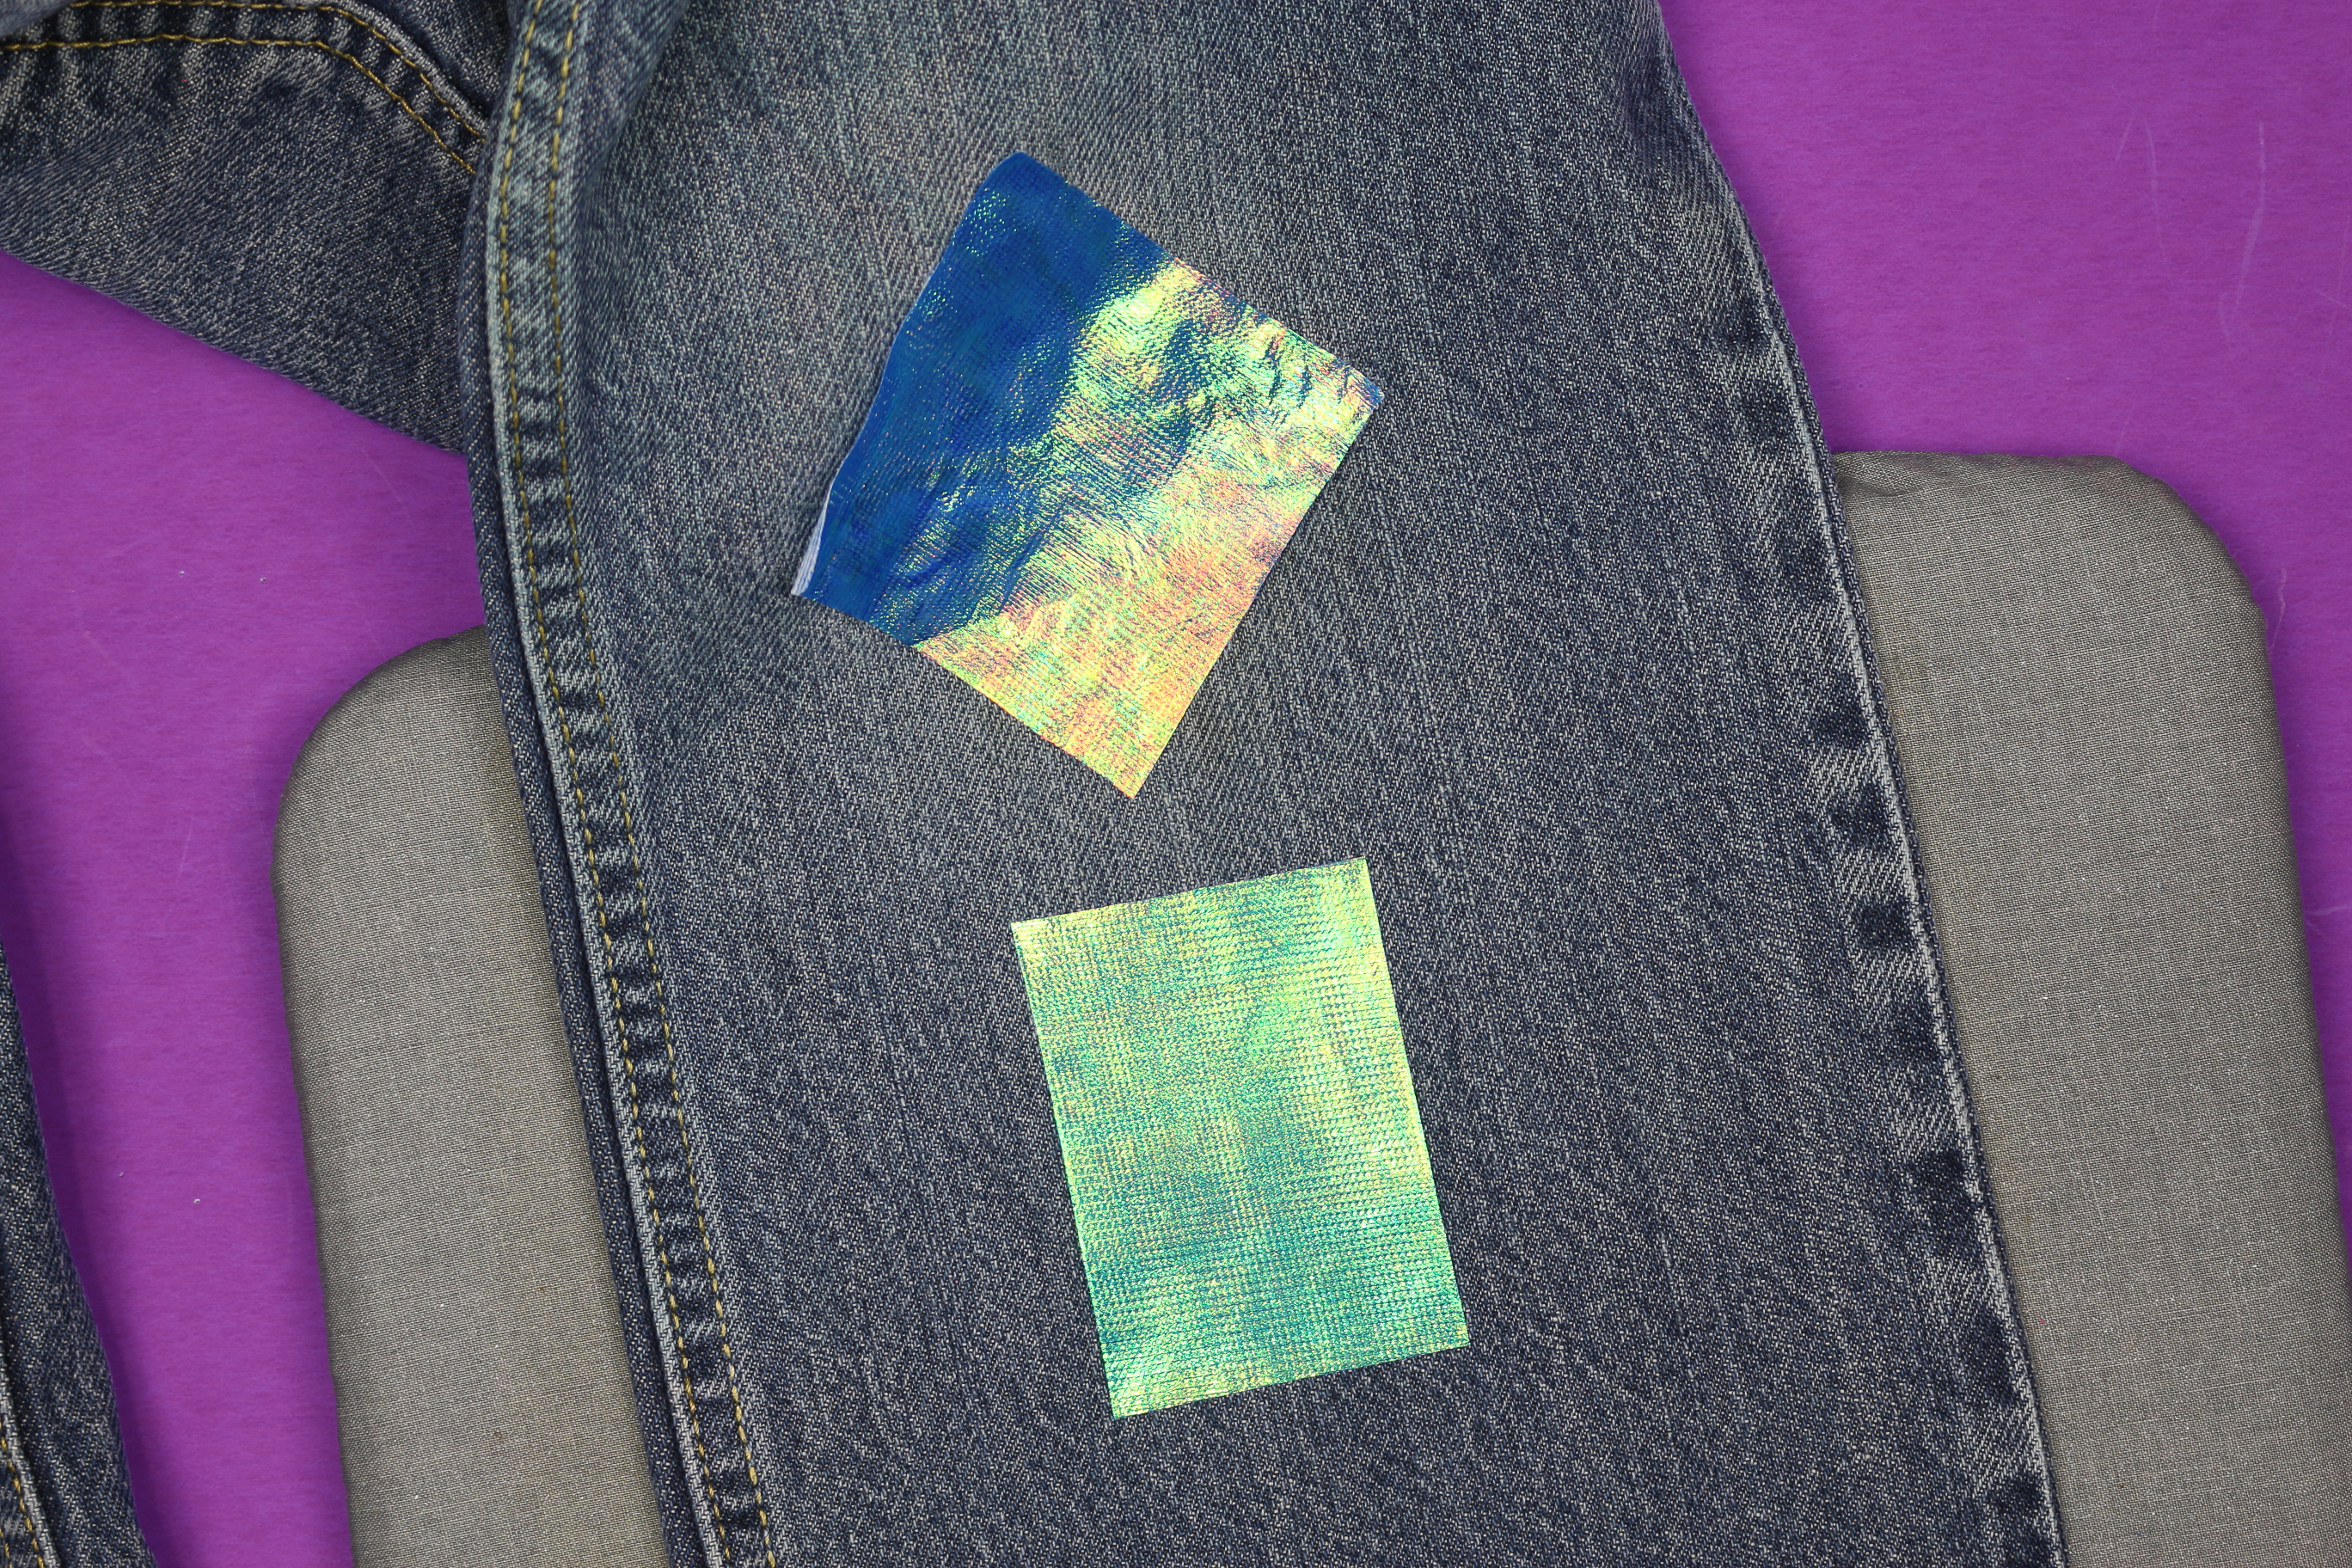 iridescent patches on jeans